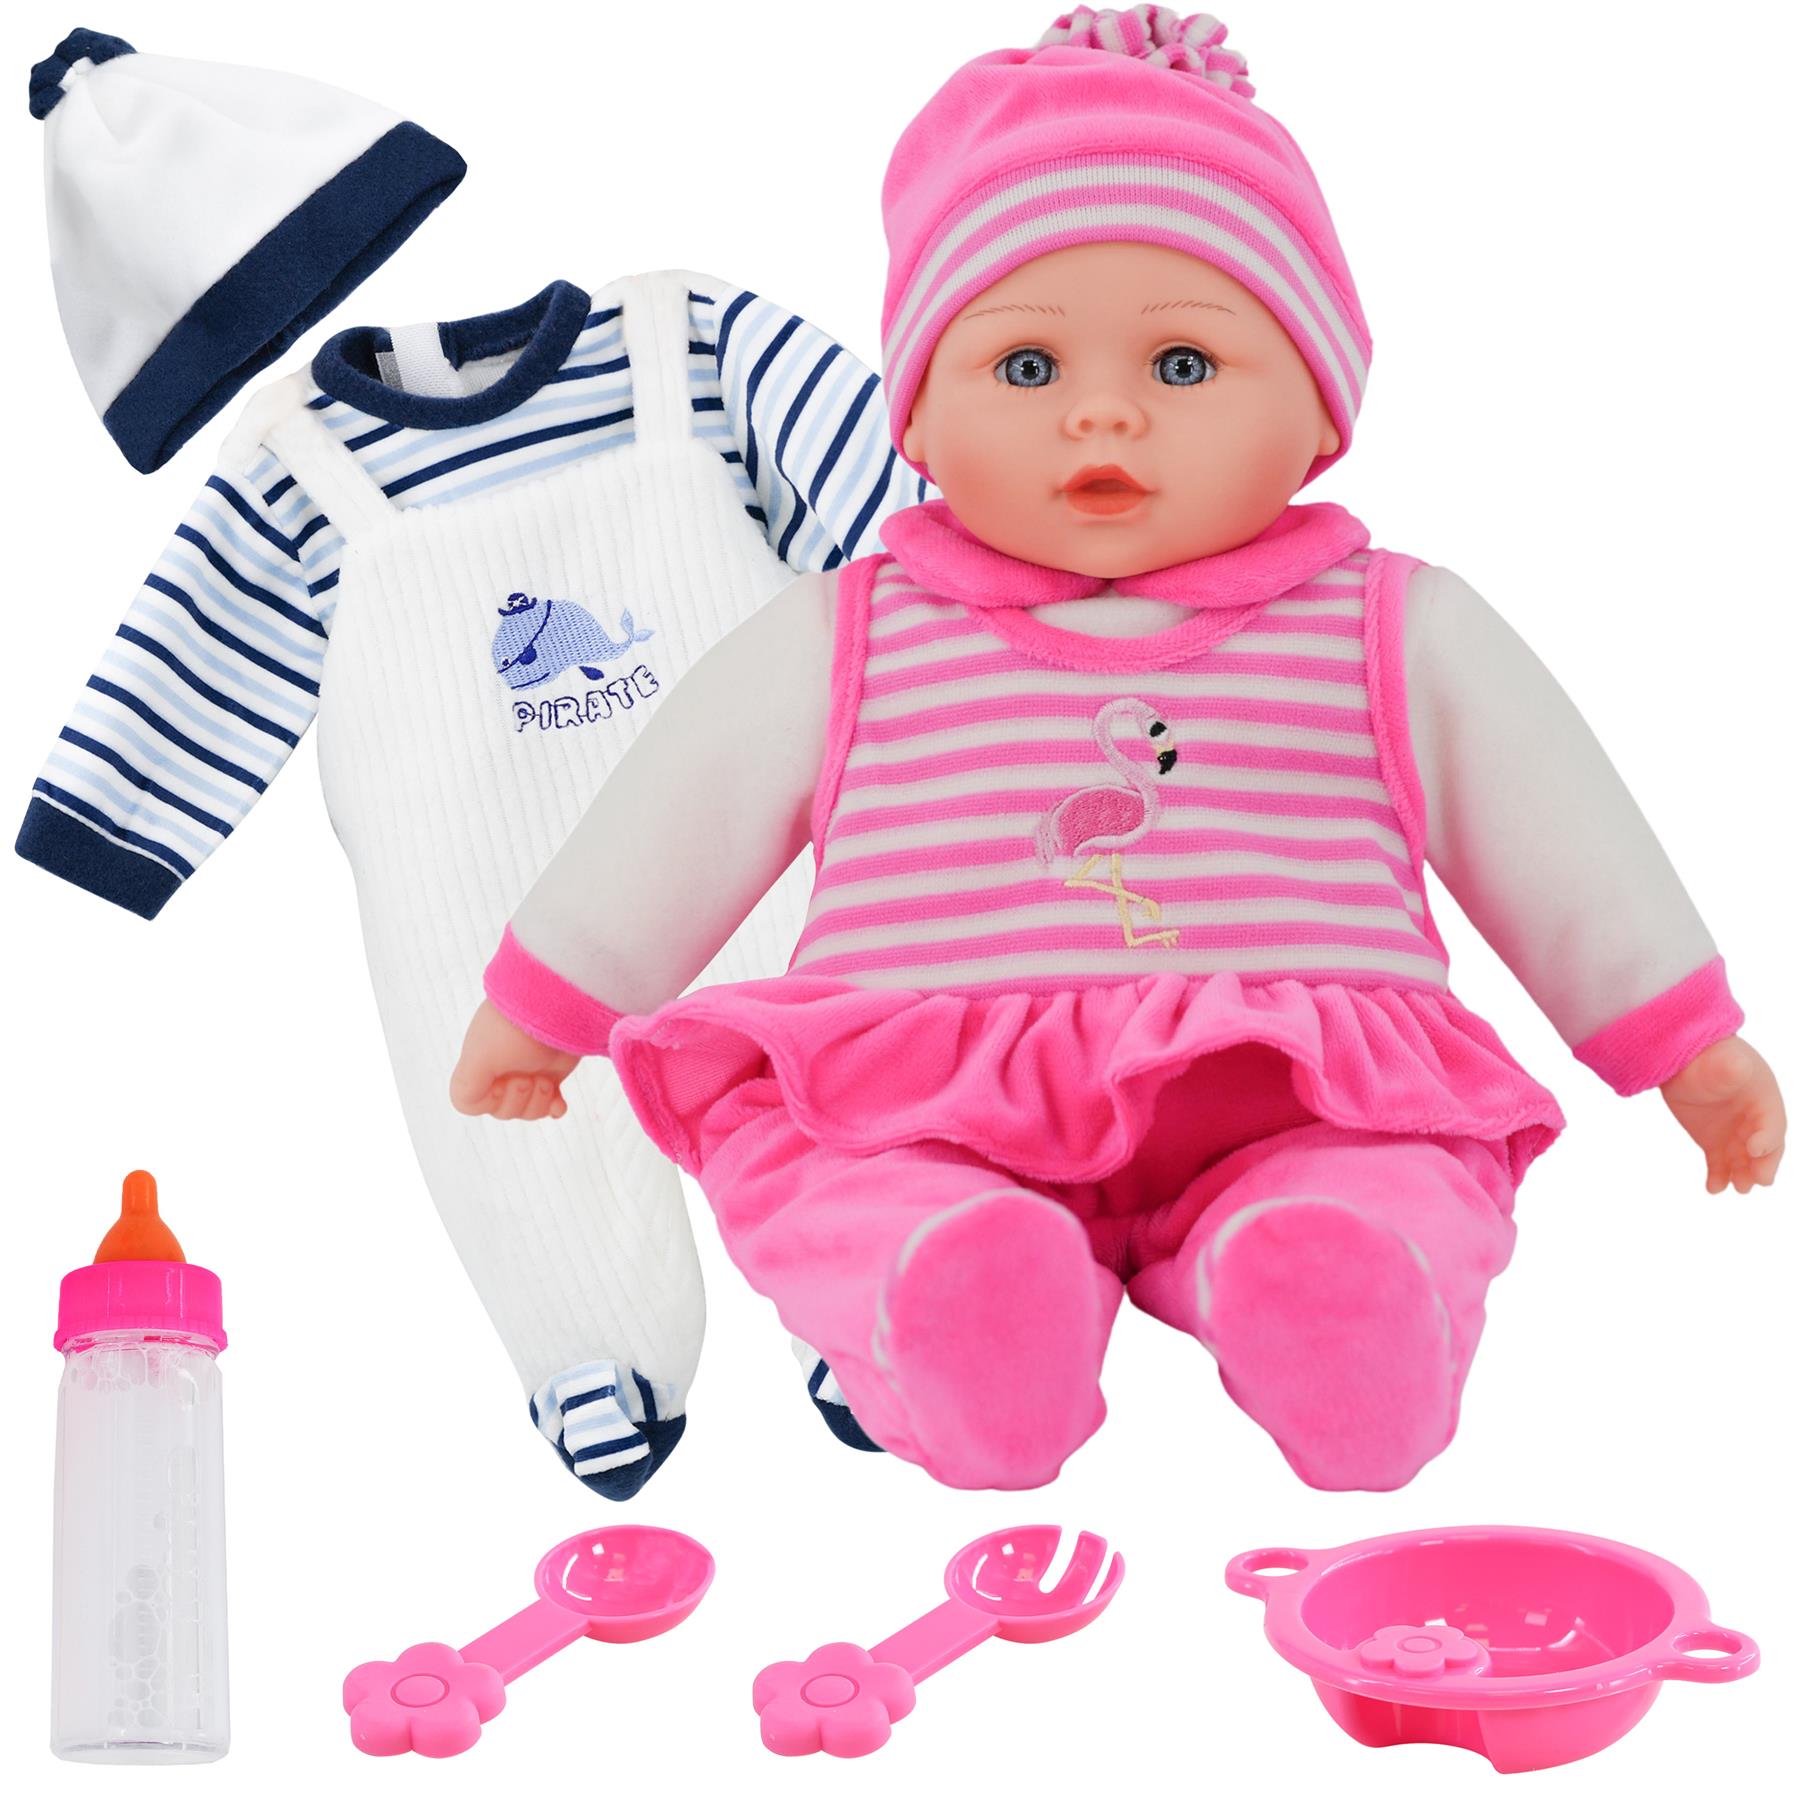 BiBi Doll 16" Doll With Extra Outfit ,Feeding Set & Magic Bottle 16” Baby Girl Doll With Extra Boy Outfit,Sounds,Feeding Set & Magic Bottle